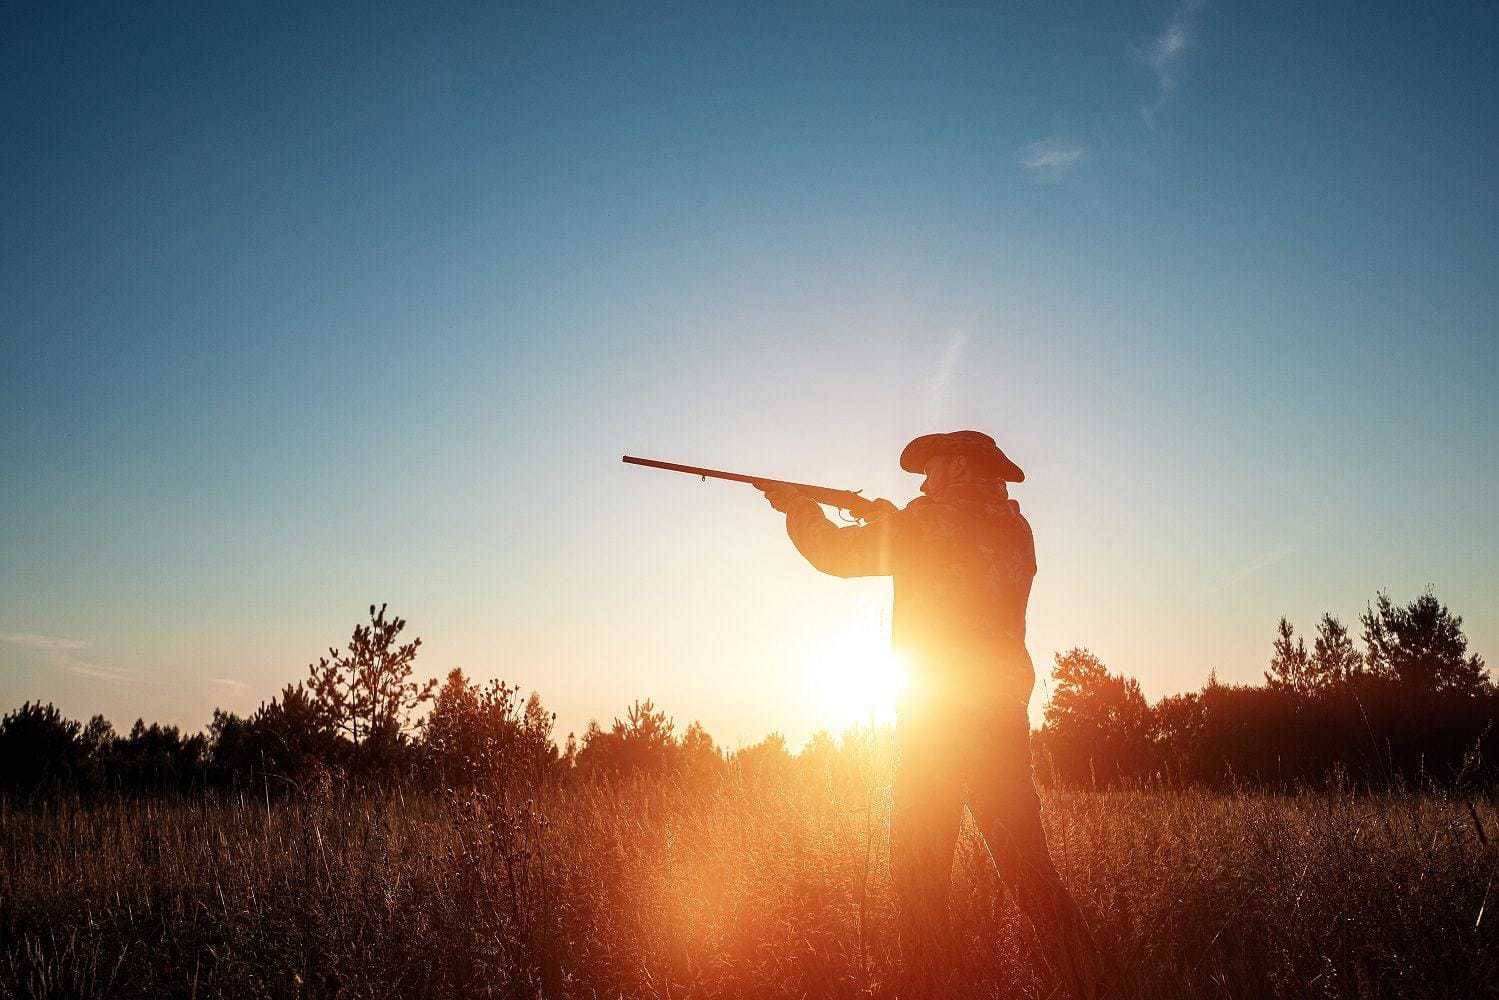 Hunter with hat and rifle in sunlight